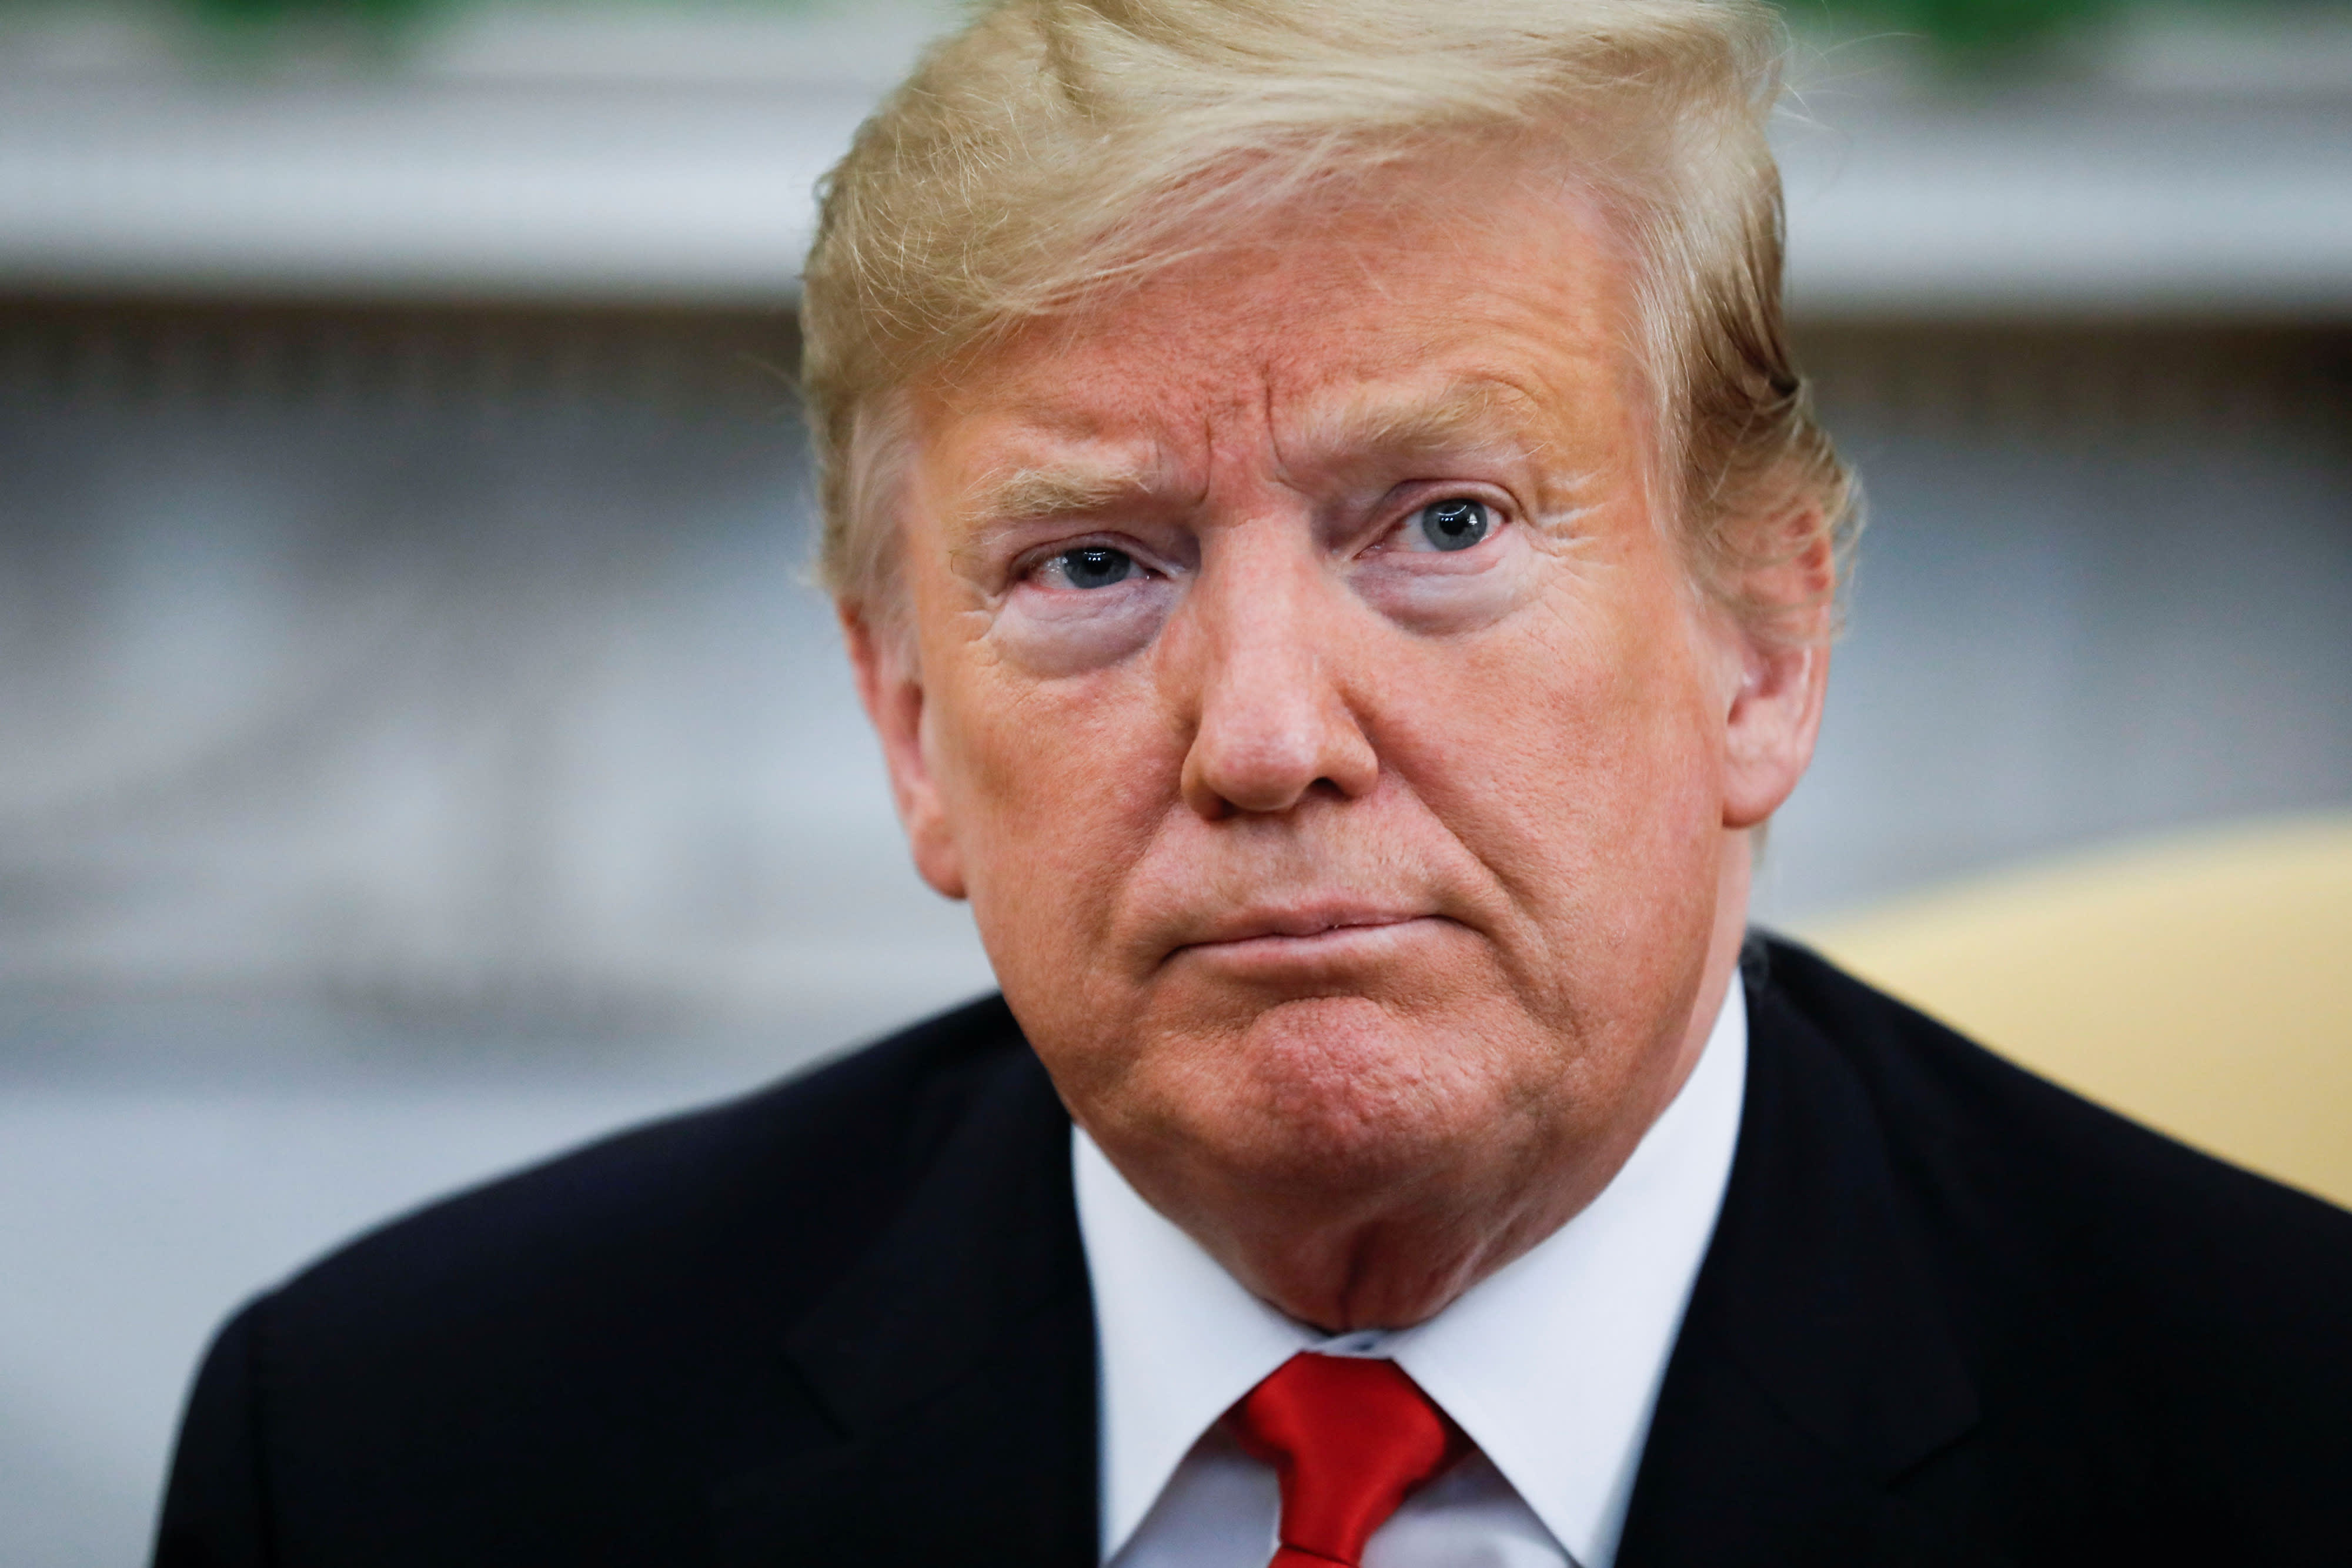 Trump says discussing Biden probe with Attorney General Barr would be 'appropriate'